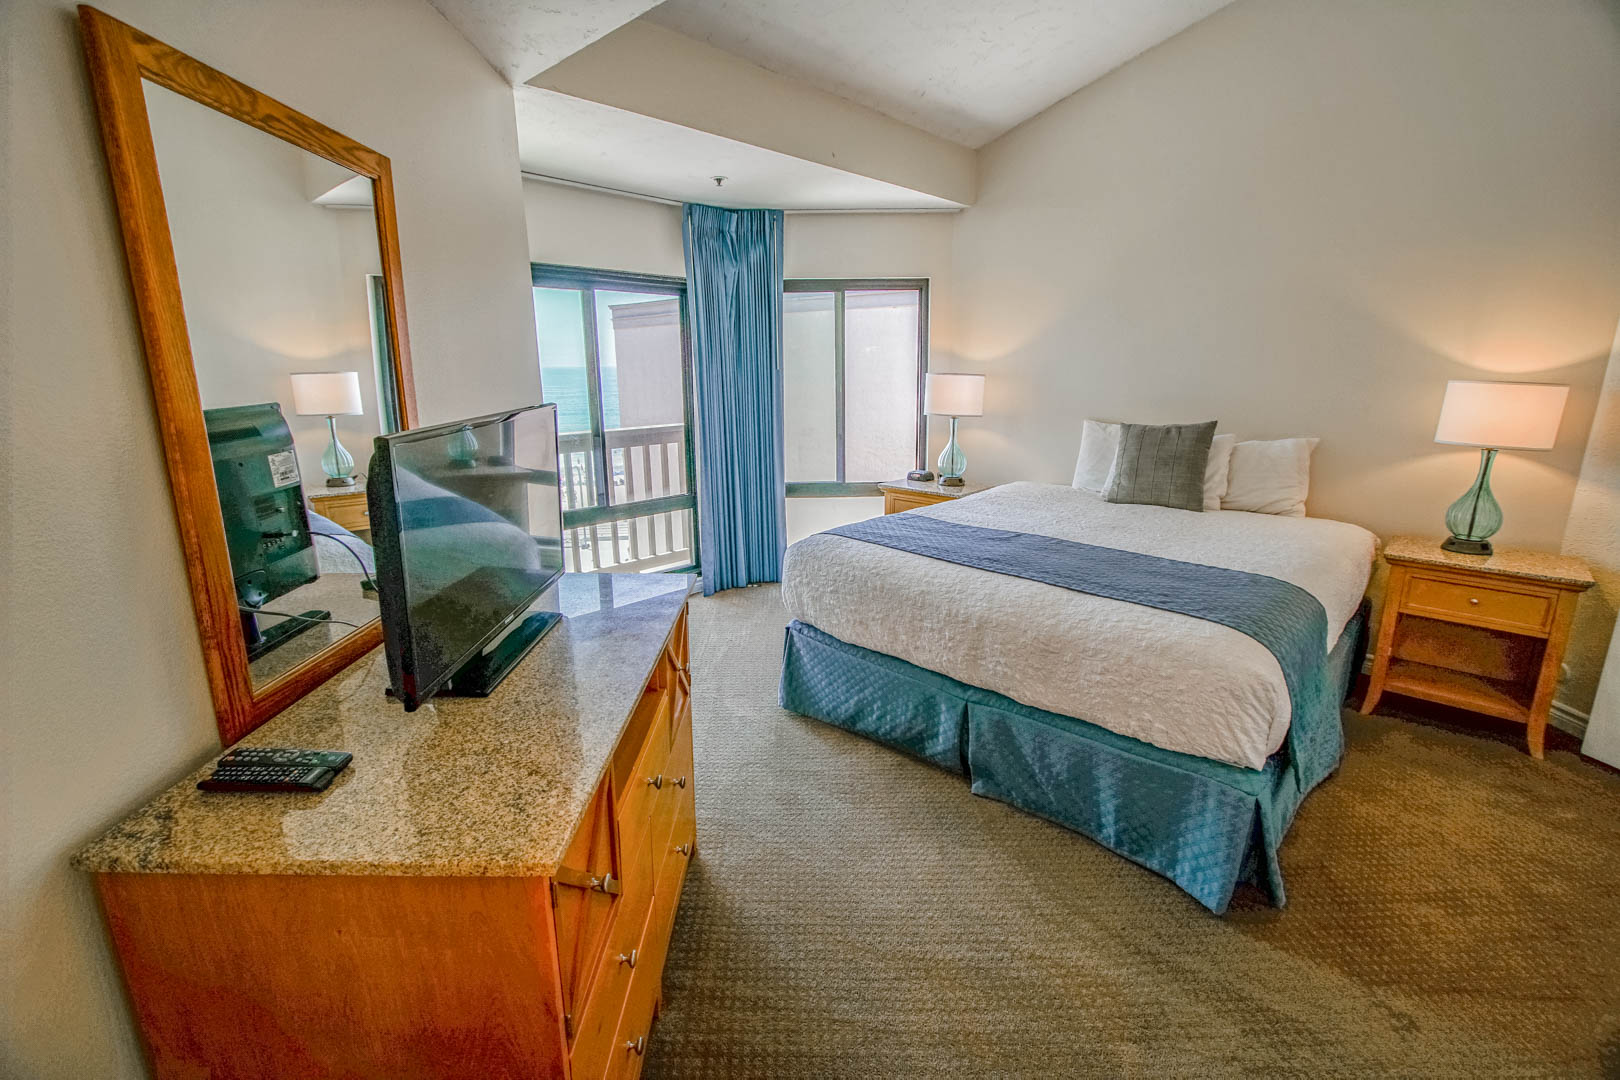 A master bedroom with a balcony overlooking the beach at VRI's See the Sea in San Diego, CA.